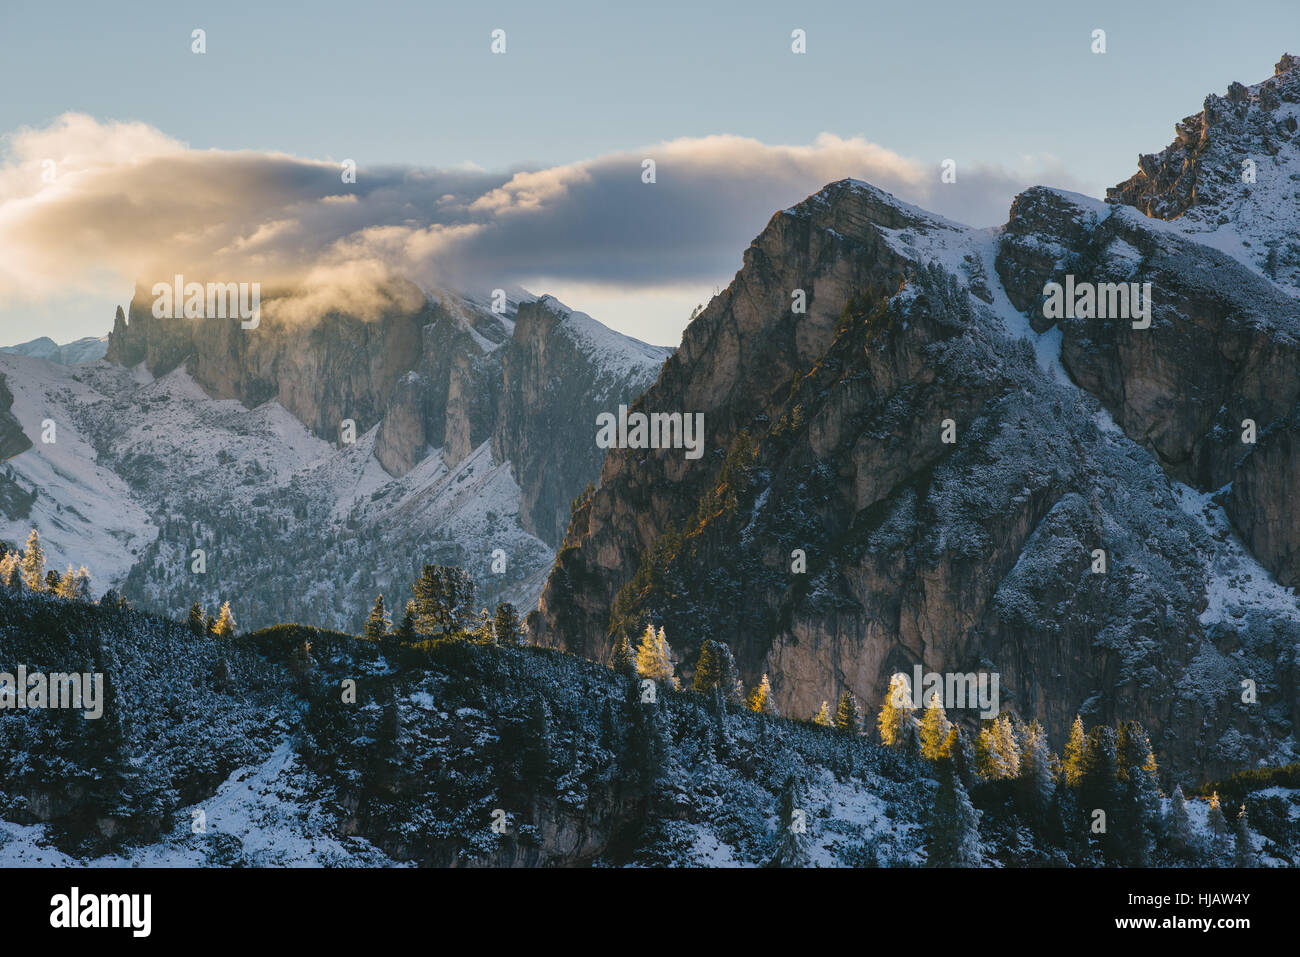 Limides Lake, South Tyrol, Dolomite Alps, Italy Stock Photo